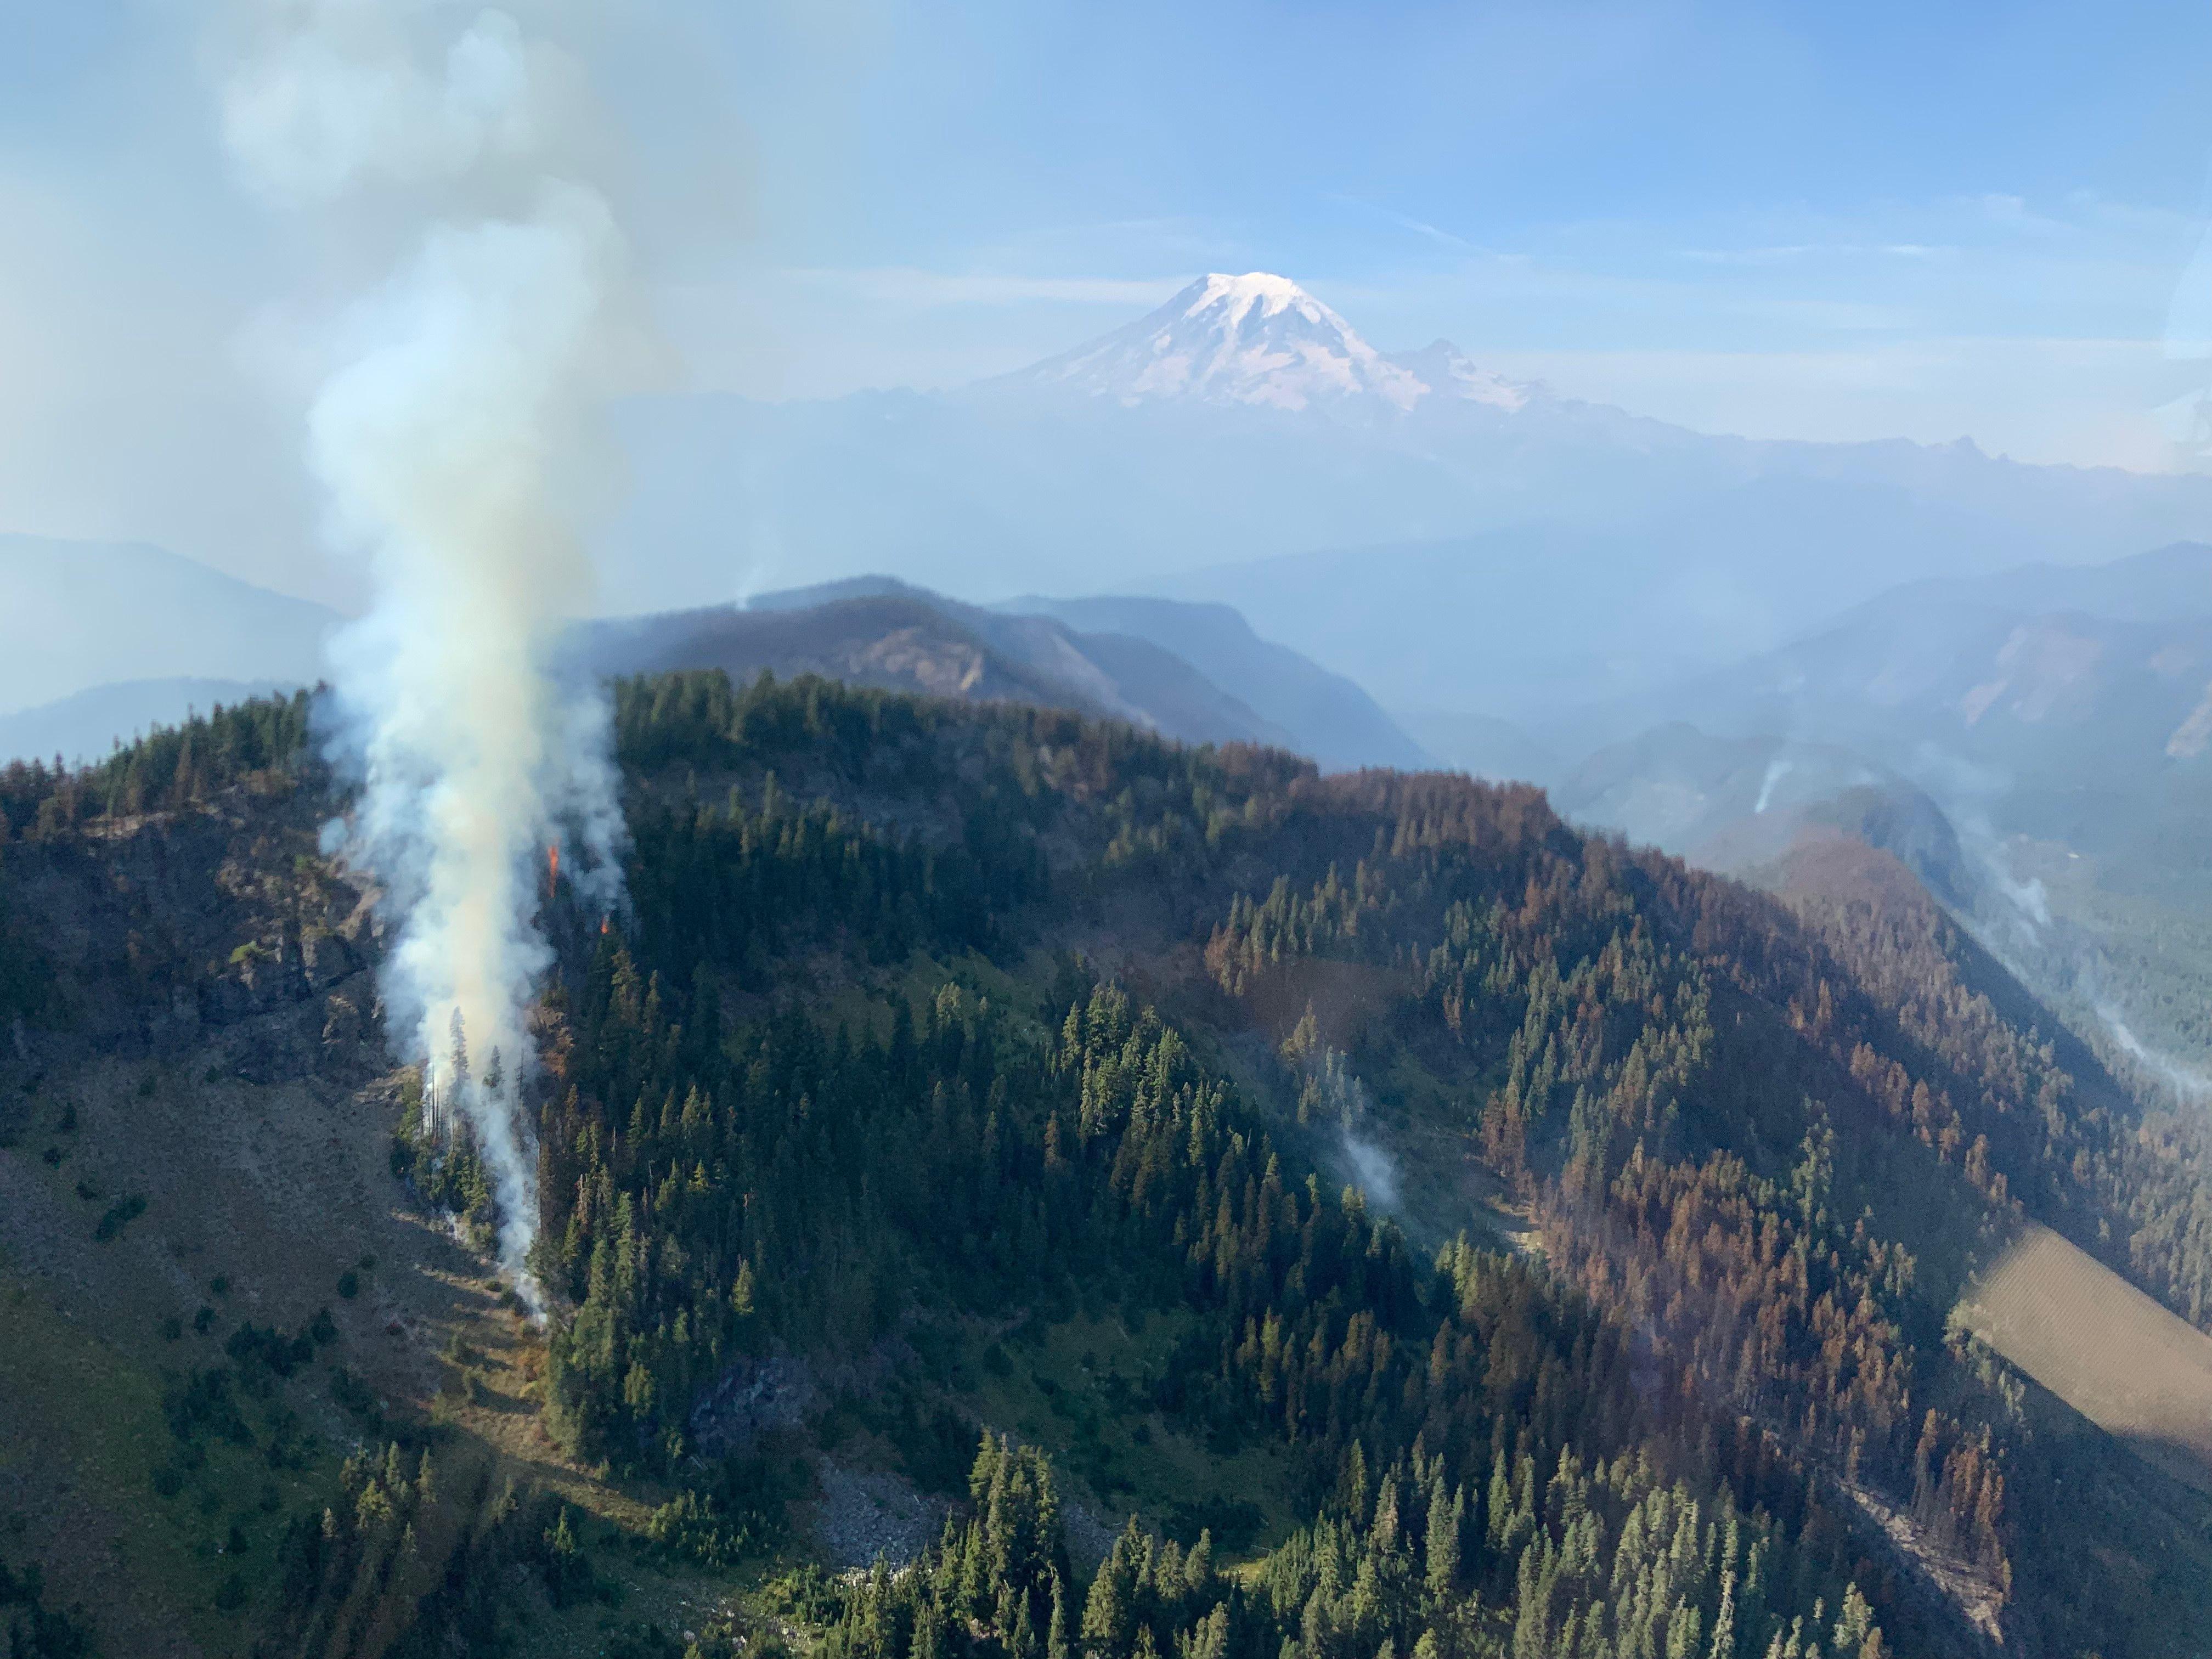 A photo taken from a helicopter looking down on part of the Goat Rocks Fire. Smoke is rising from a few patches of the forested areas of a steep knob, with many rocky areas showing. Mount Rainier is visible in the distance.